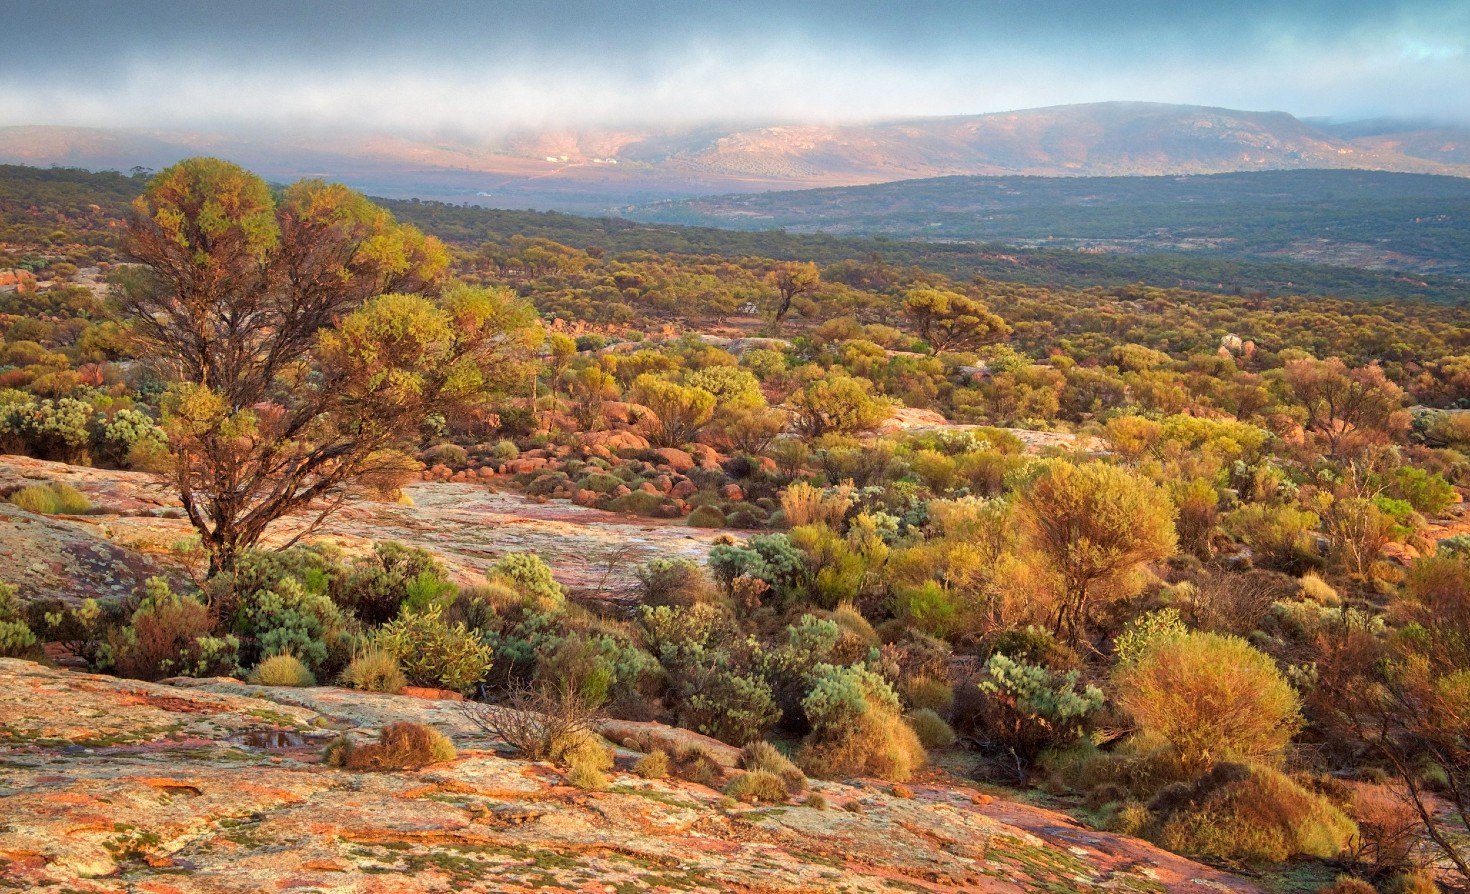 A forest in South Australia for which the company GreenCollar is developing biodiversity credits. (Source: Accounting for Nature)